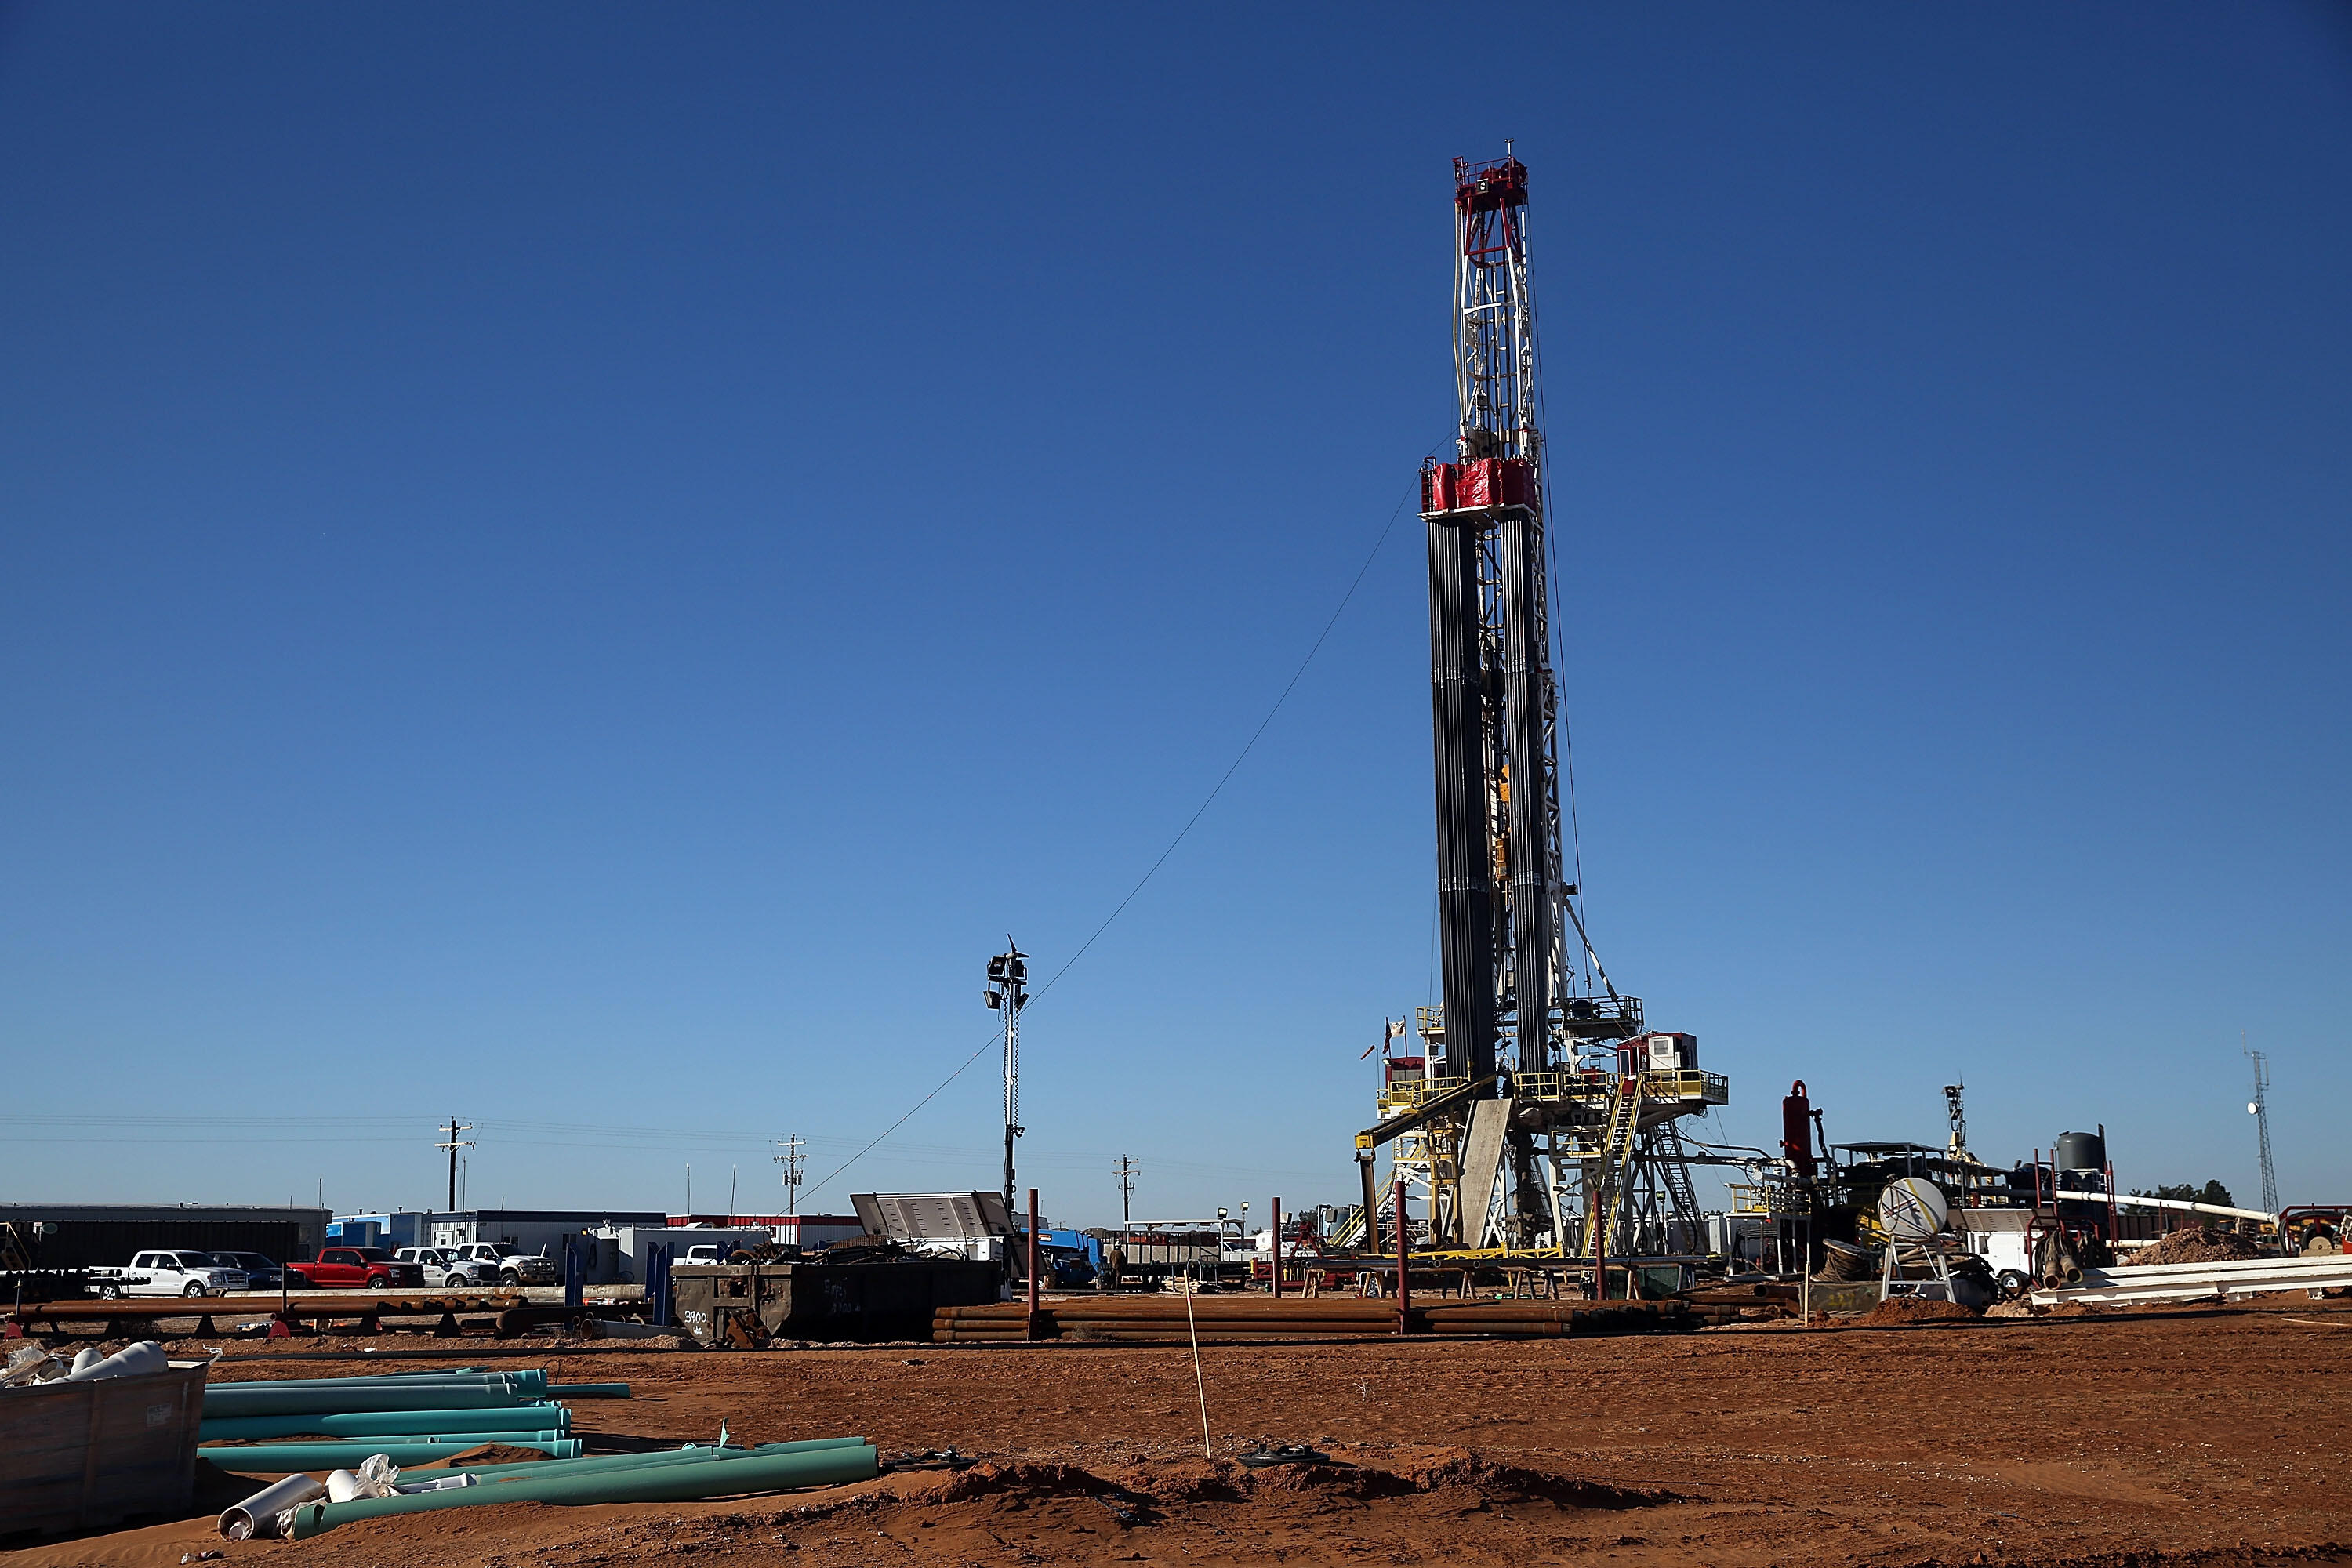 MIDLAND, TX - JANUARY 20: A fracking site is situated on the outskirts of town  in the Permian Basin oil field on January 21, 2016 in the oil town of Midland, Texas. Despite recent drops in the price of oil, many residents of Andrews, and similar towns ac